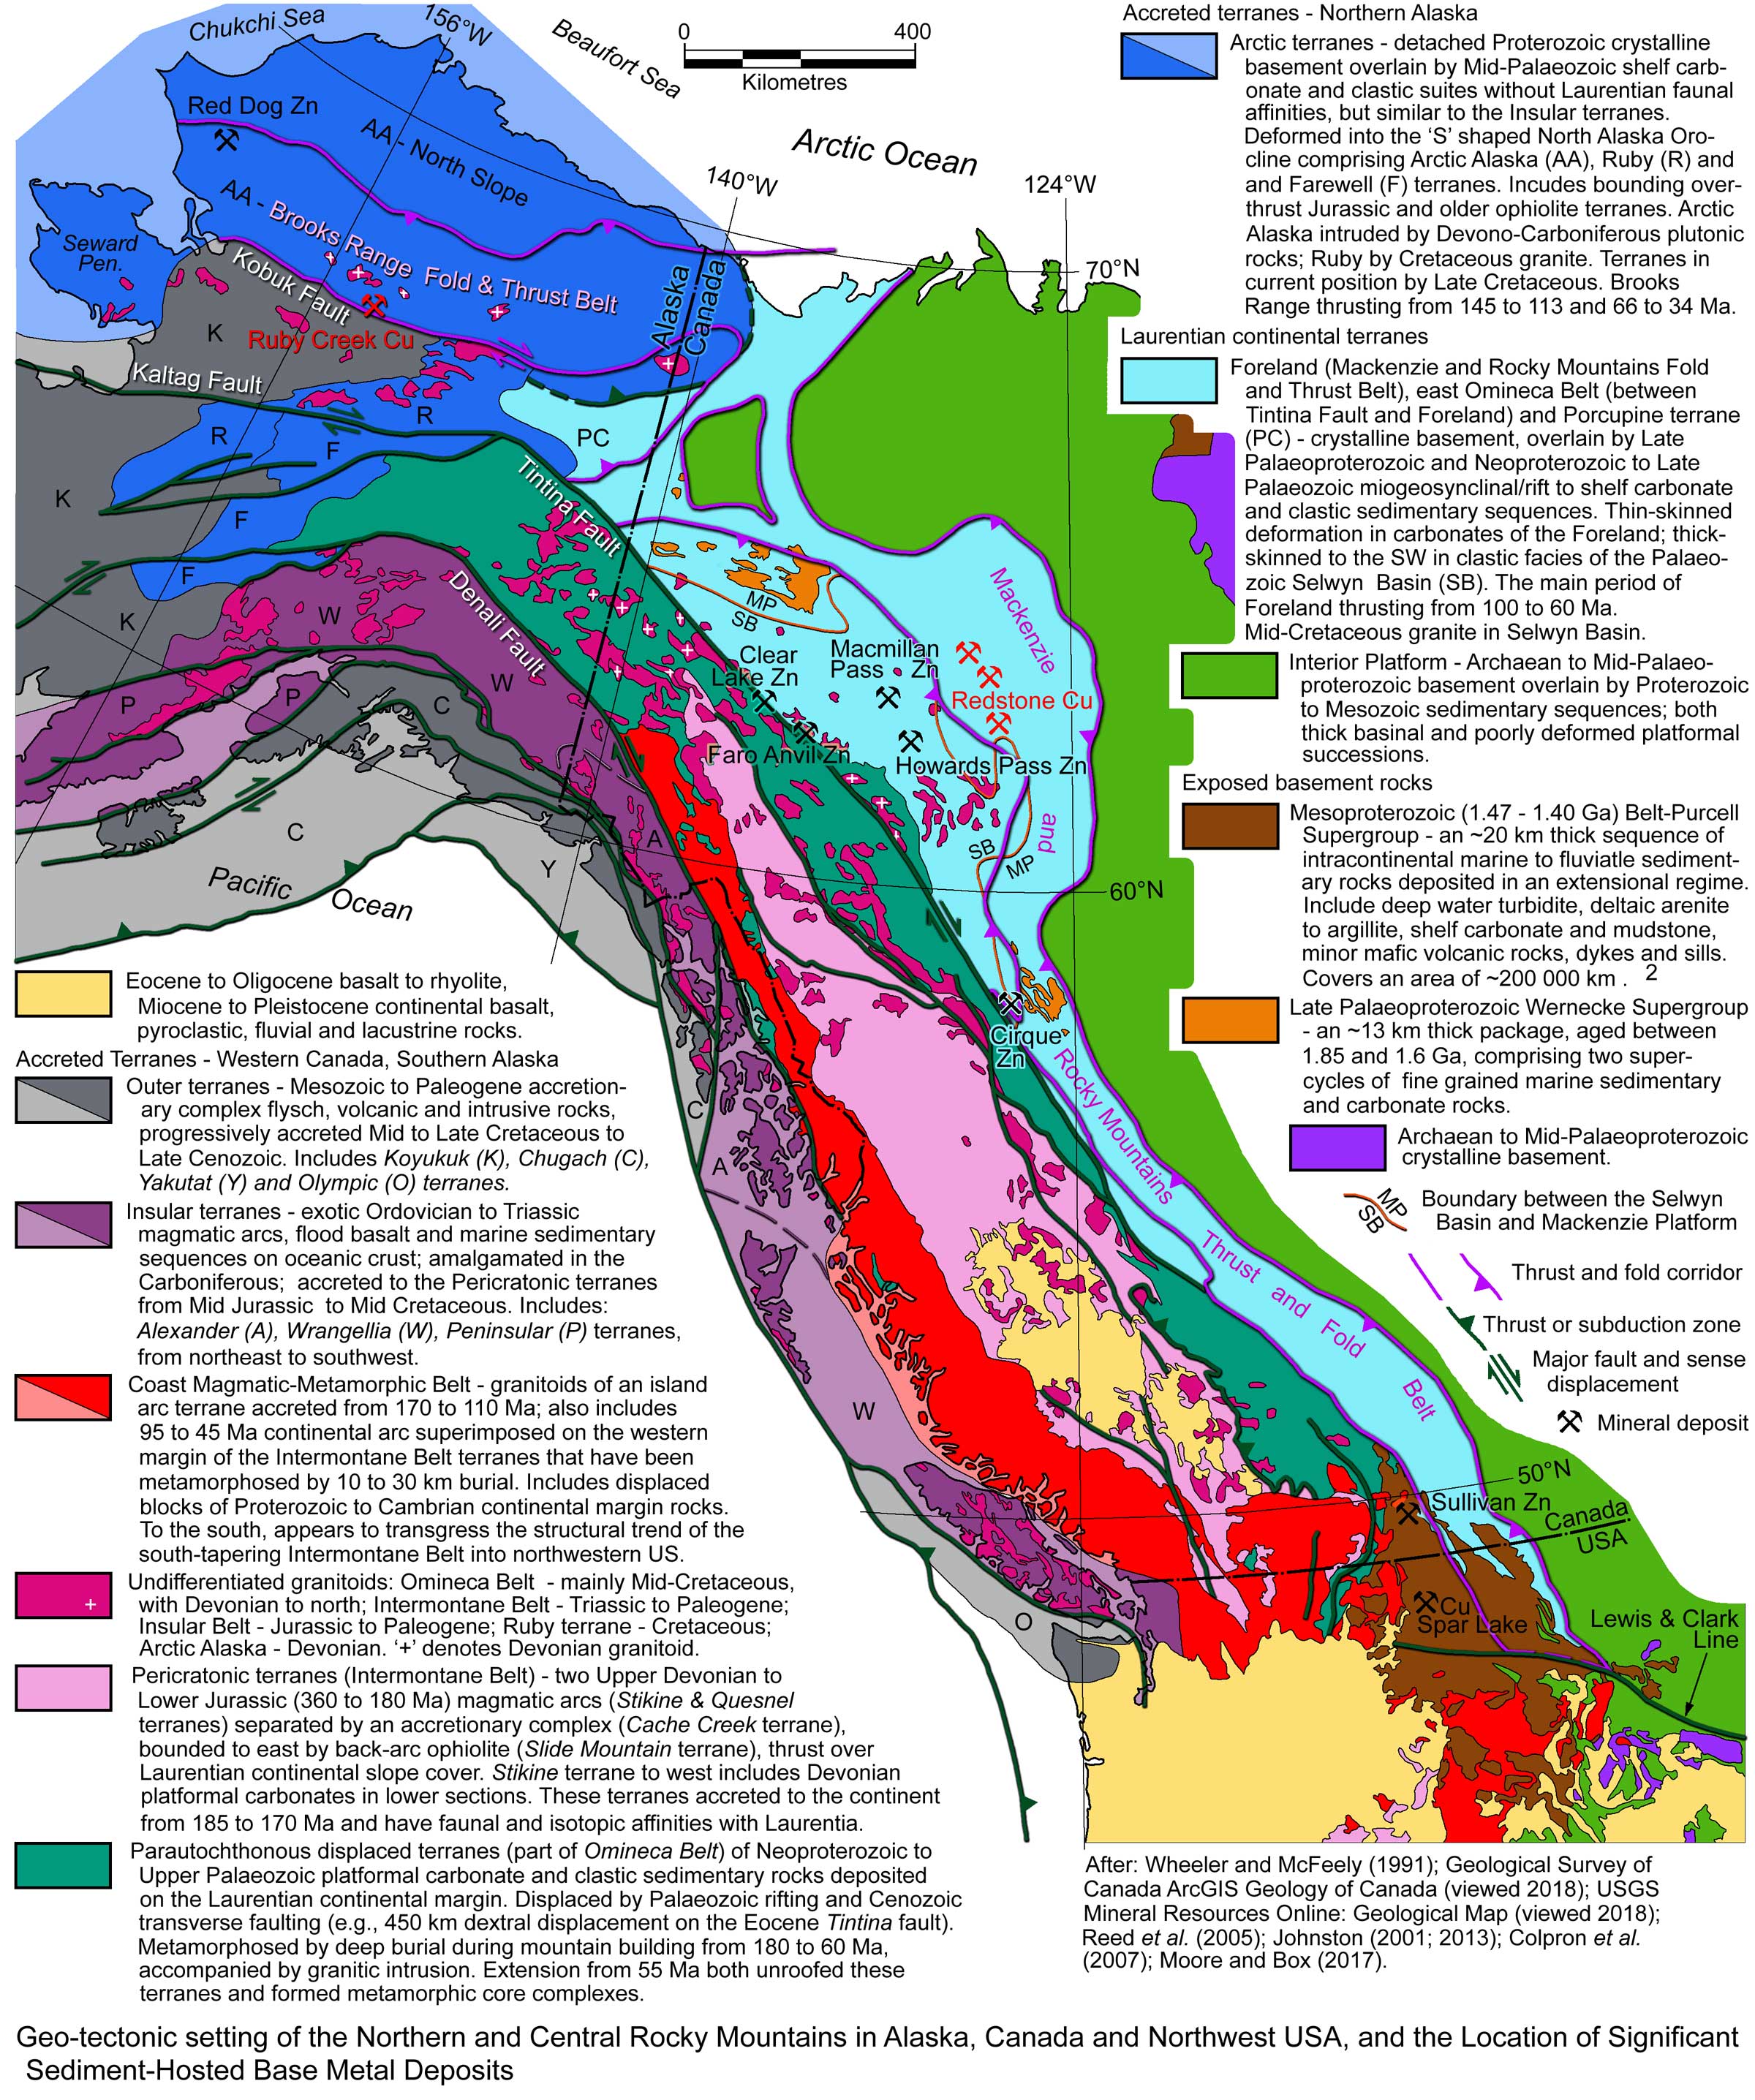 Geotectonic setting Rockies Sed Hosted Base Metals